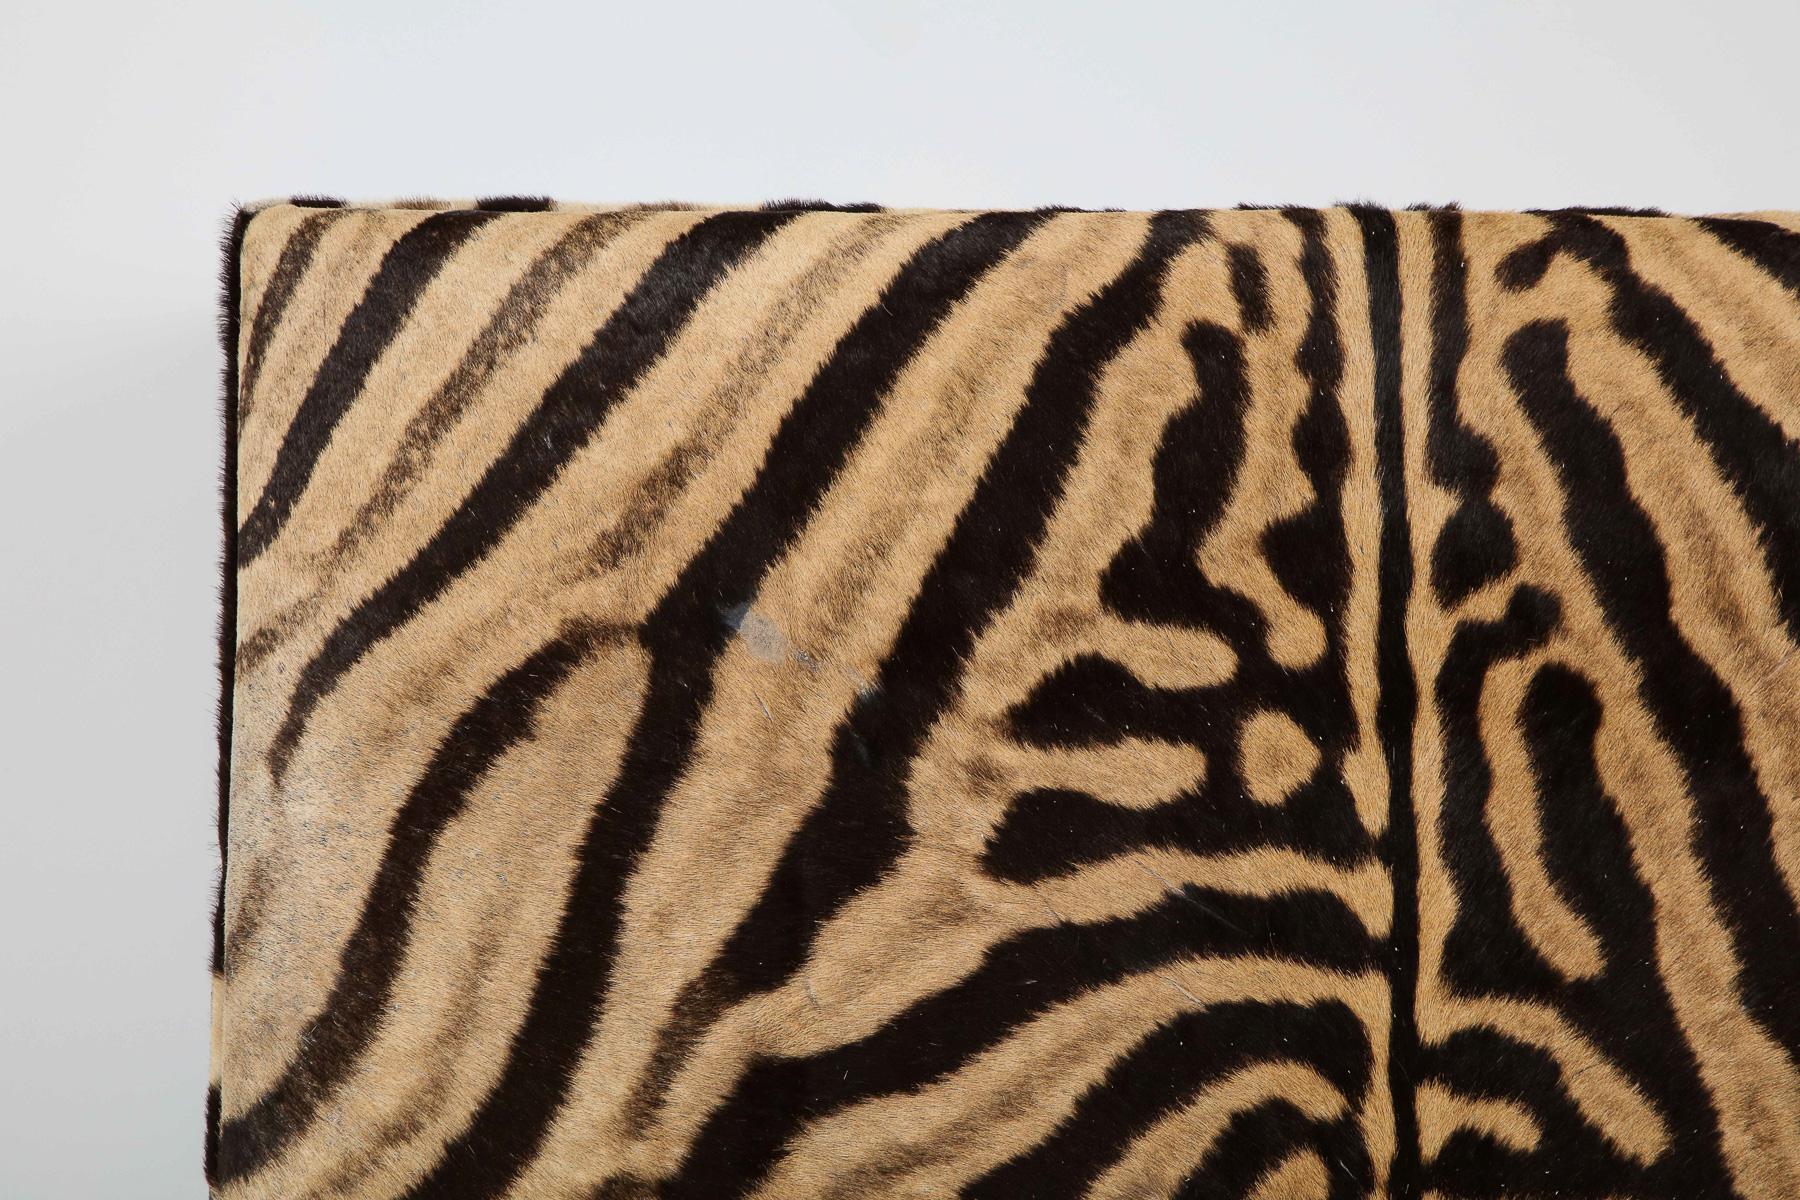 Hand-Crafted Zebra Ottoman / Coffee Table, Large Square, Two Zebra hides, Custom Made In USA For Sale